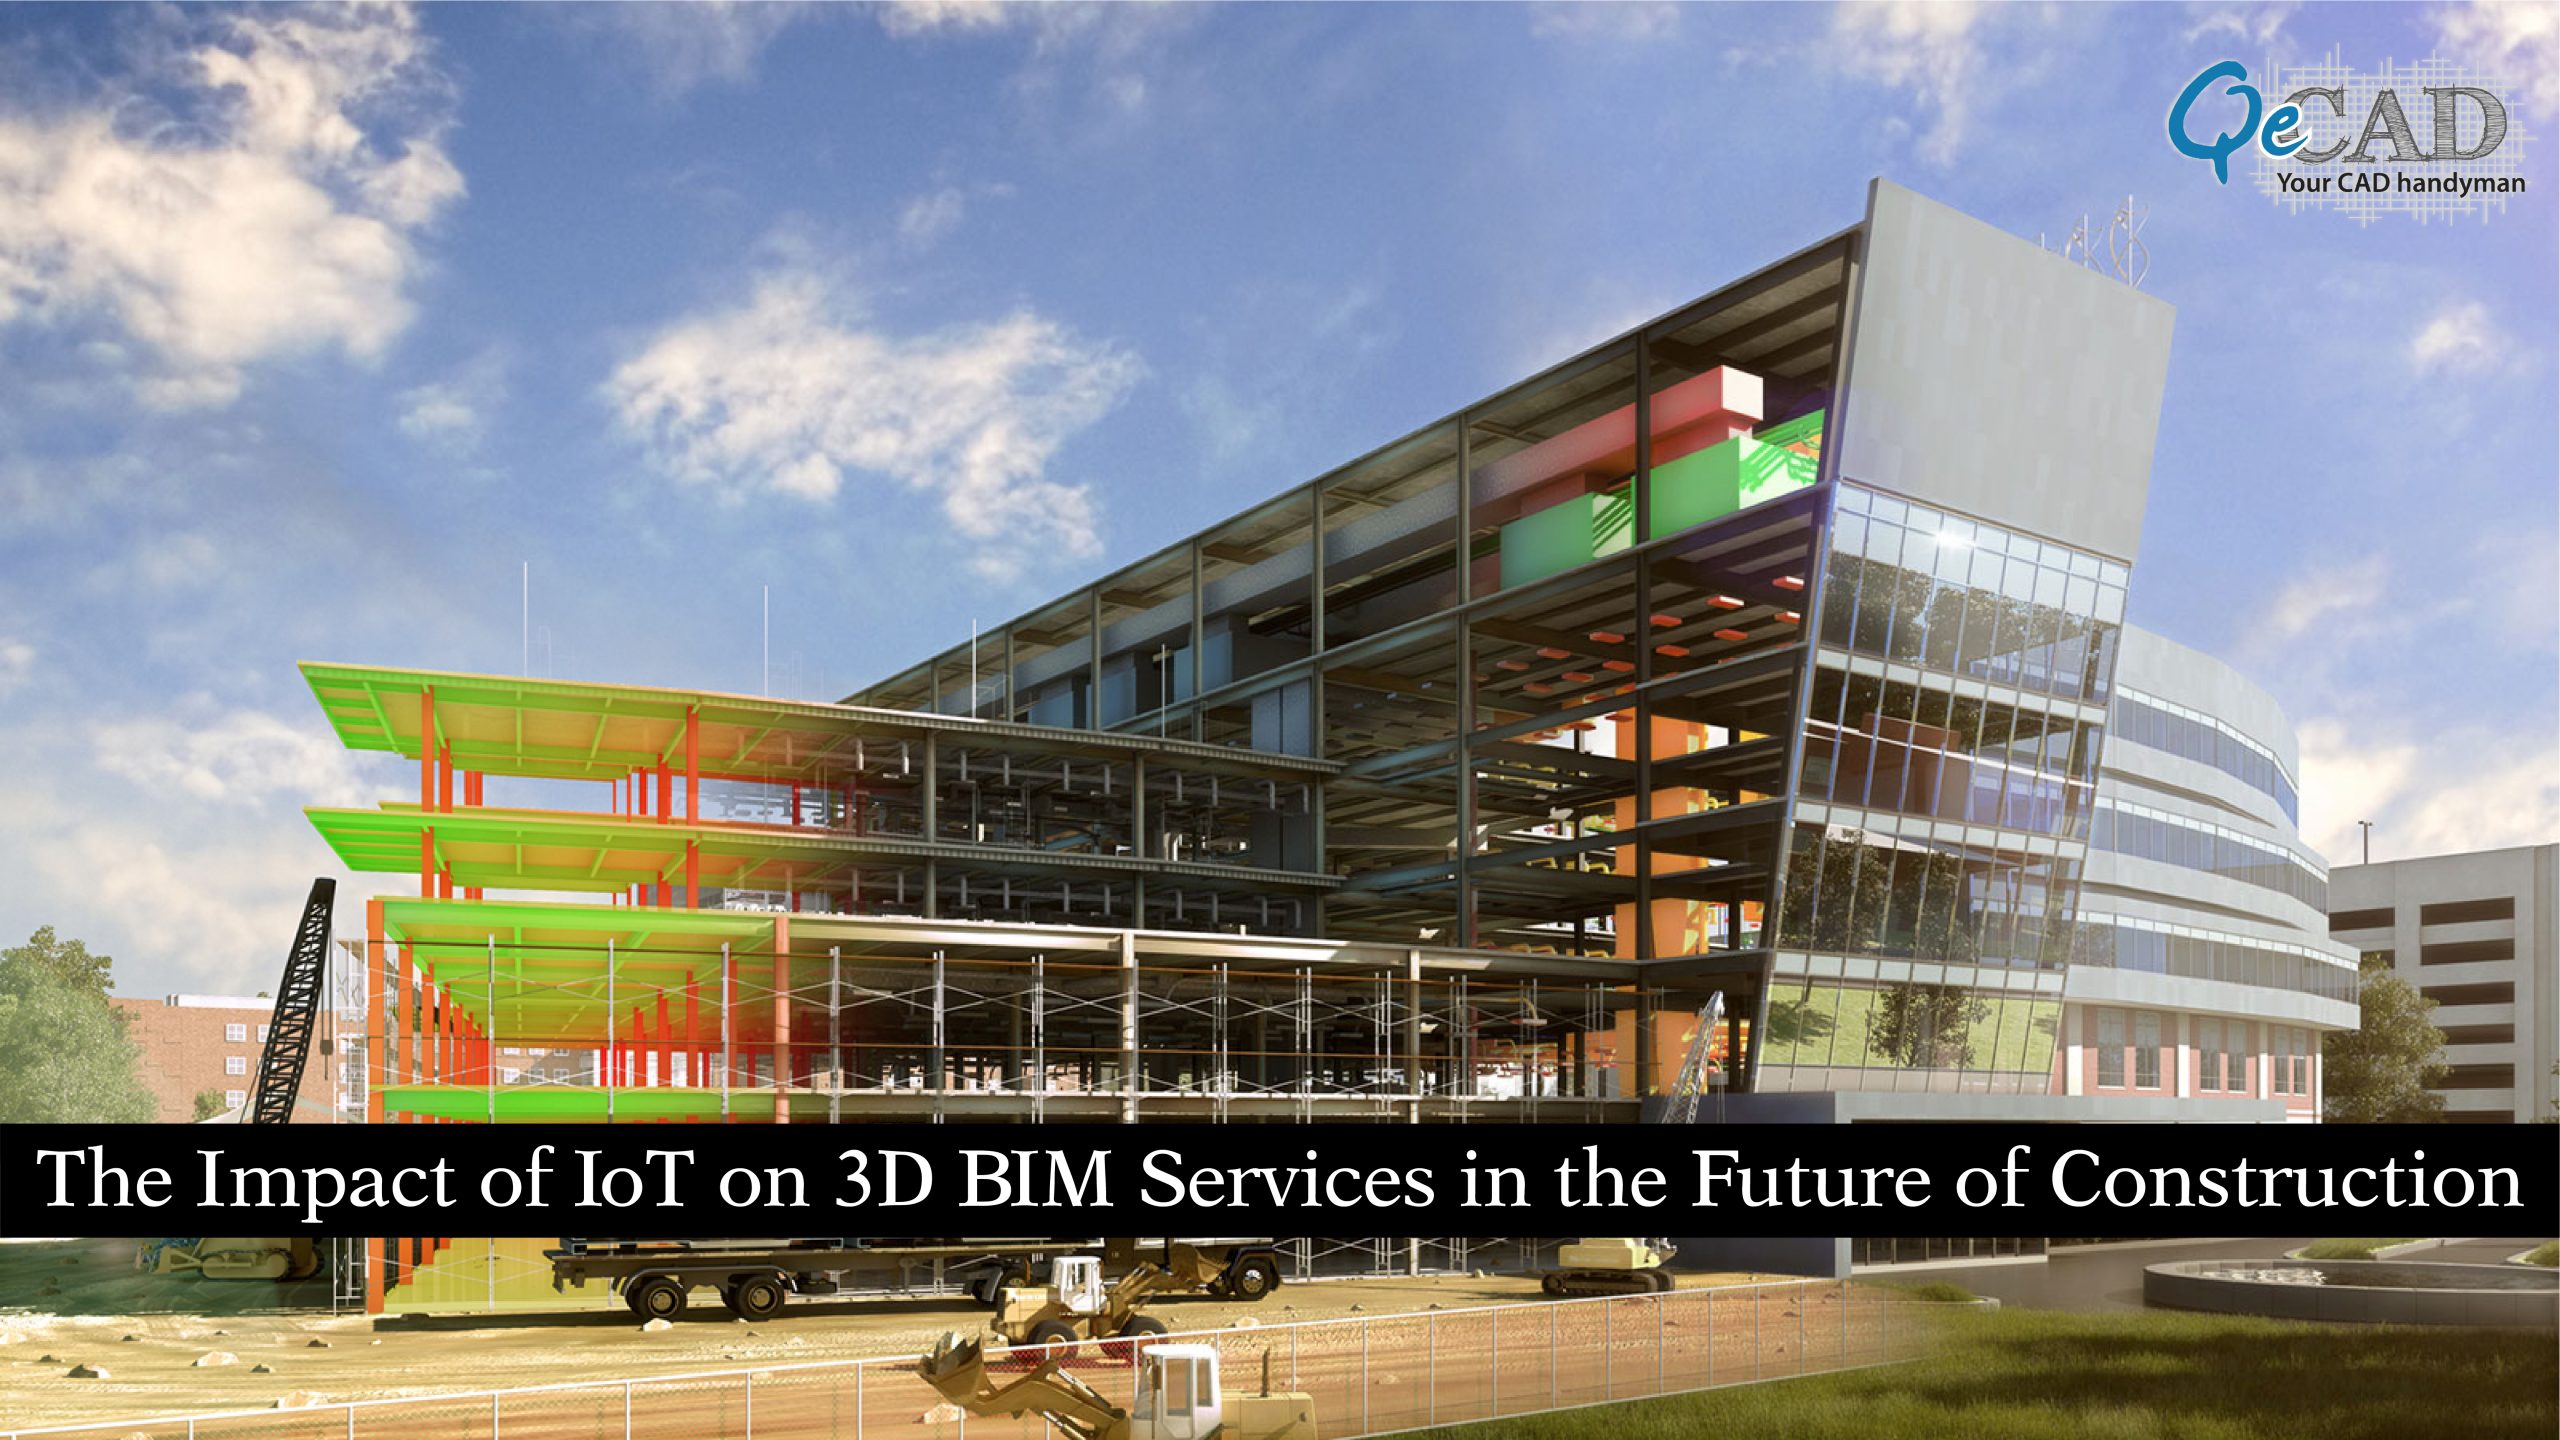 The Impact of IoT on 3D BIM Services in the Future of Construction